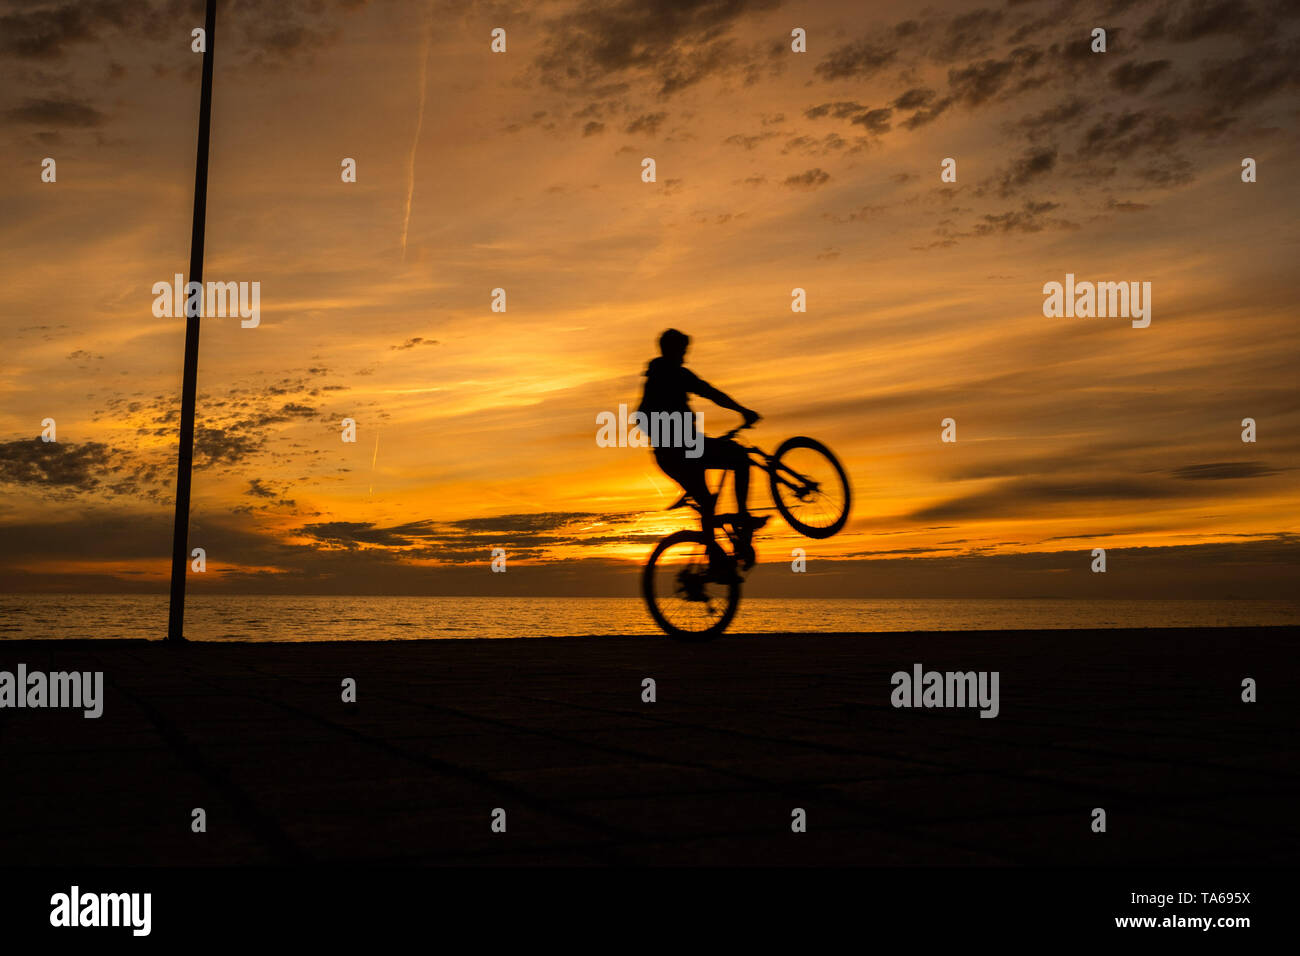 Aberystwyth Wales UK, Wednesday 22 May 2019  UK Weather: People silhouetted  cycling along the seafront promenade at sunset in Aberystwyth on a mild May evening, at the end of a day of warm spring sunshine on the west coast of Wales. photo credit: Keith Morris / Alamy Live News Stock Photo